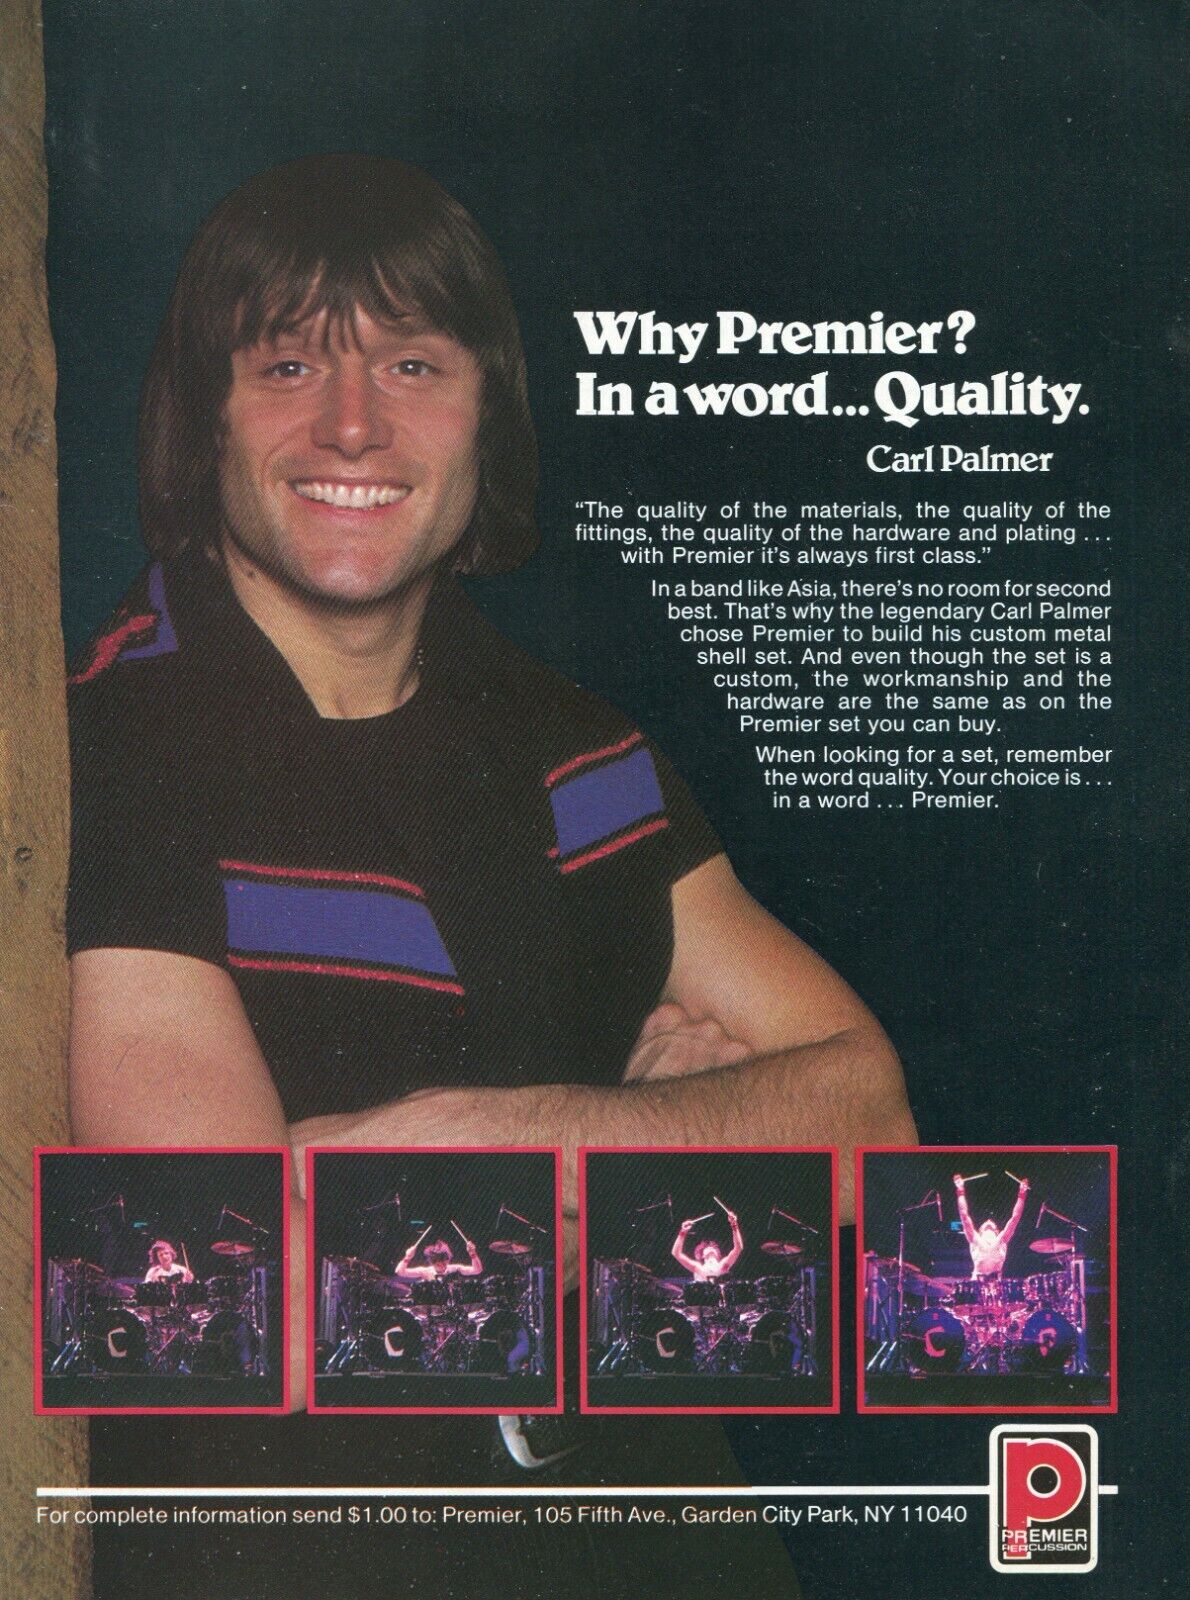 1983 Print Ad of Premier Drums w Carl Palmer of Asia